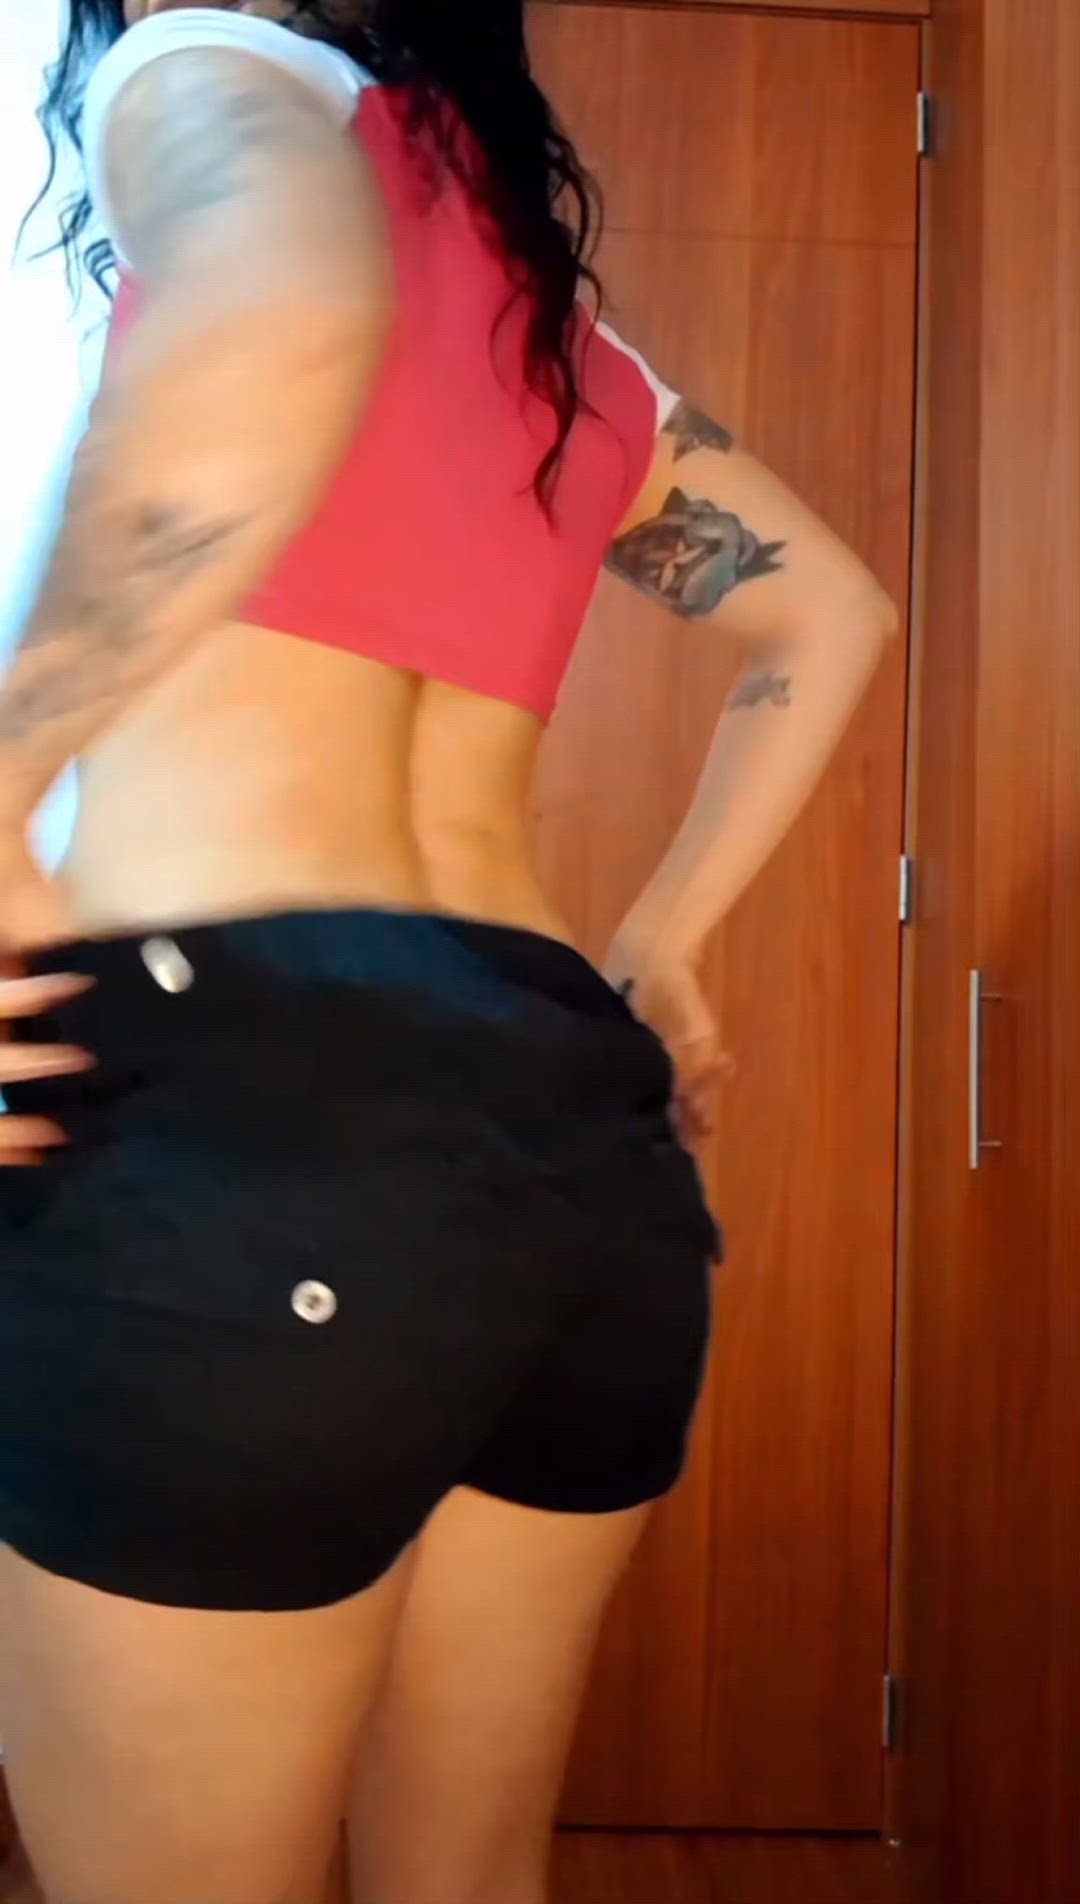 Ass porn video with onlyfans model evabelle <strong>@eva_belle</strong>